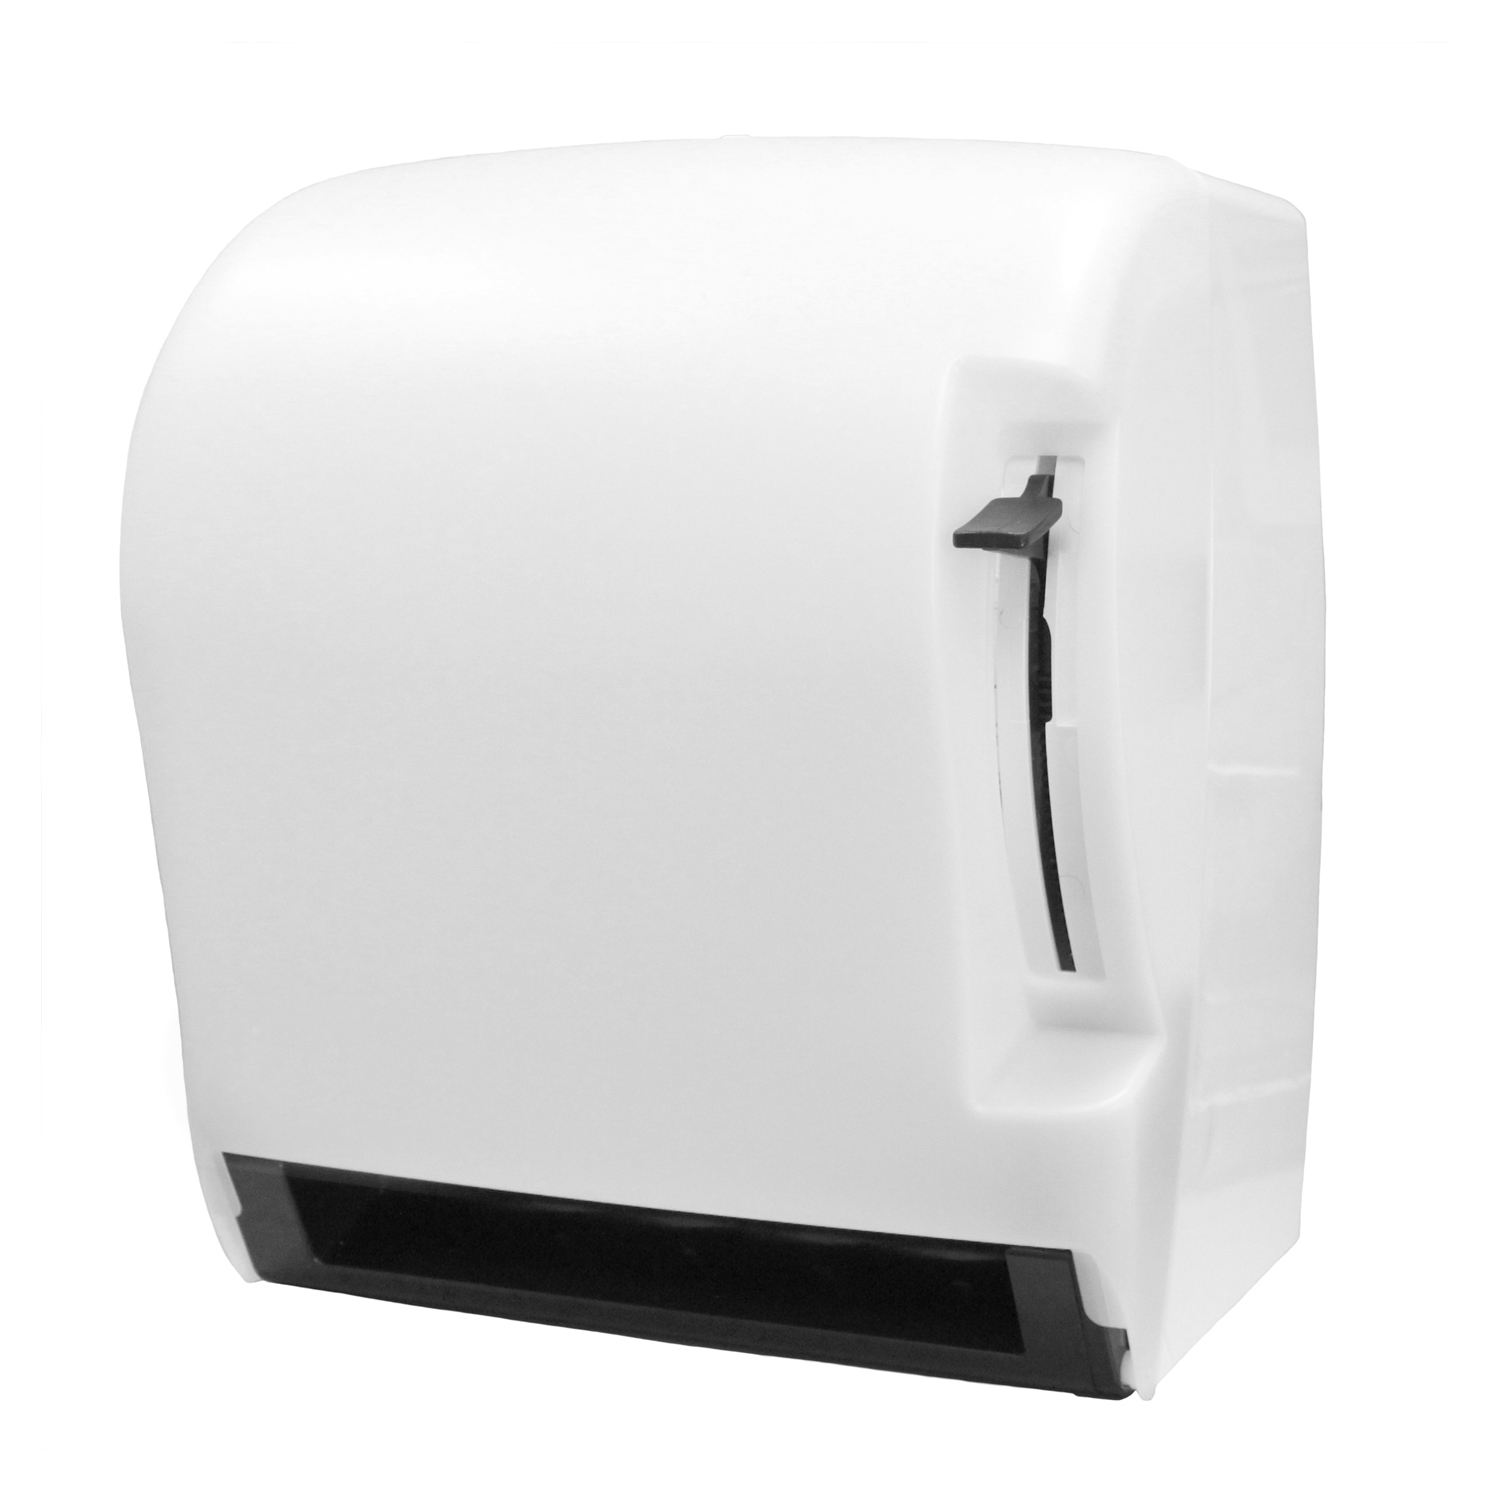 Automatic Paper Towel Roll Dispenser In Satin Gold, ATD-10 – Electronic  Faucet